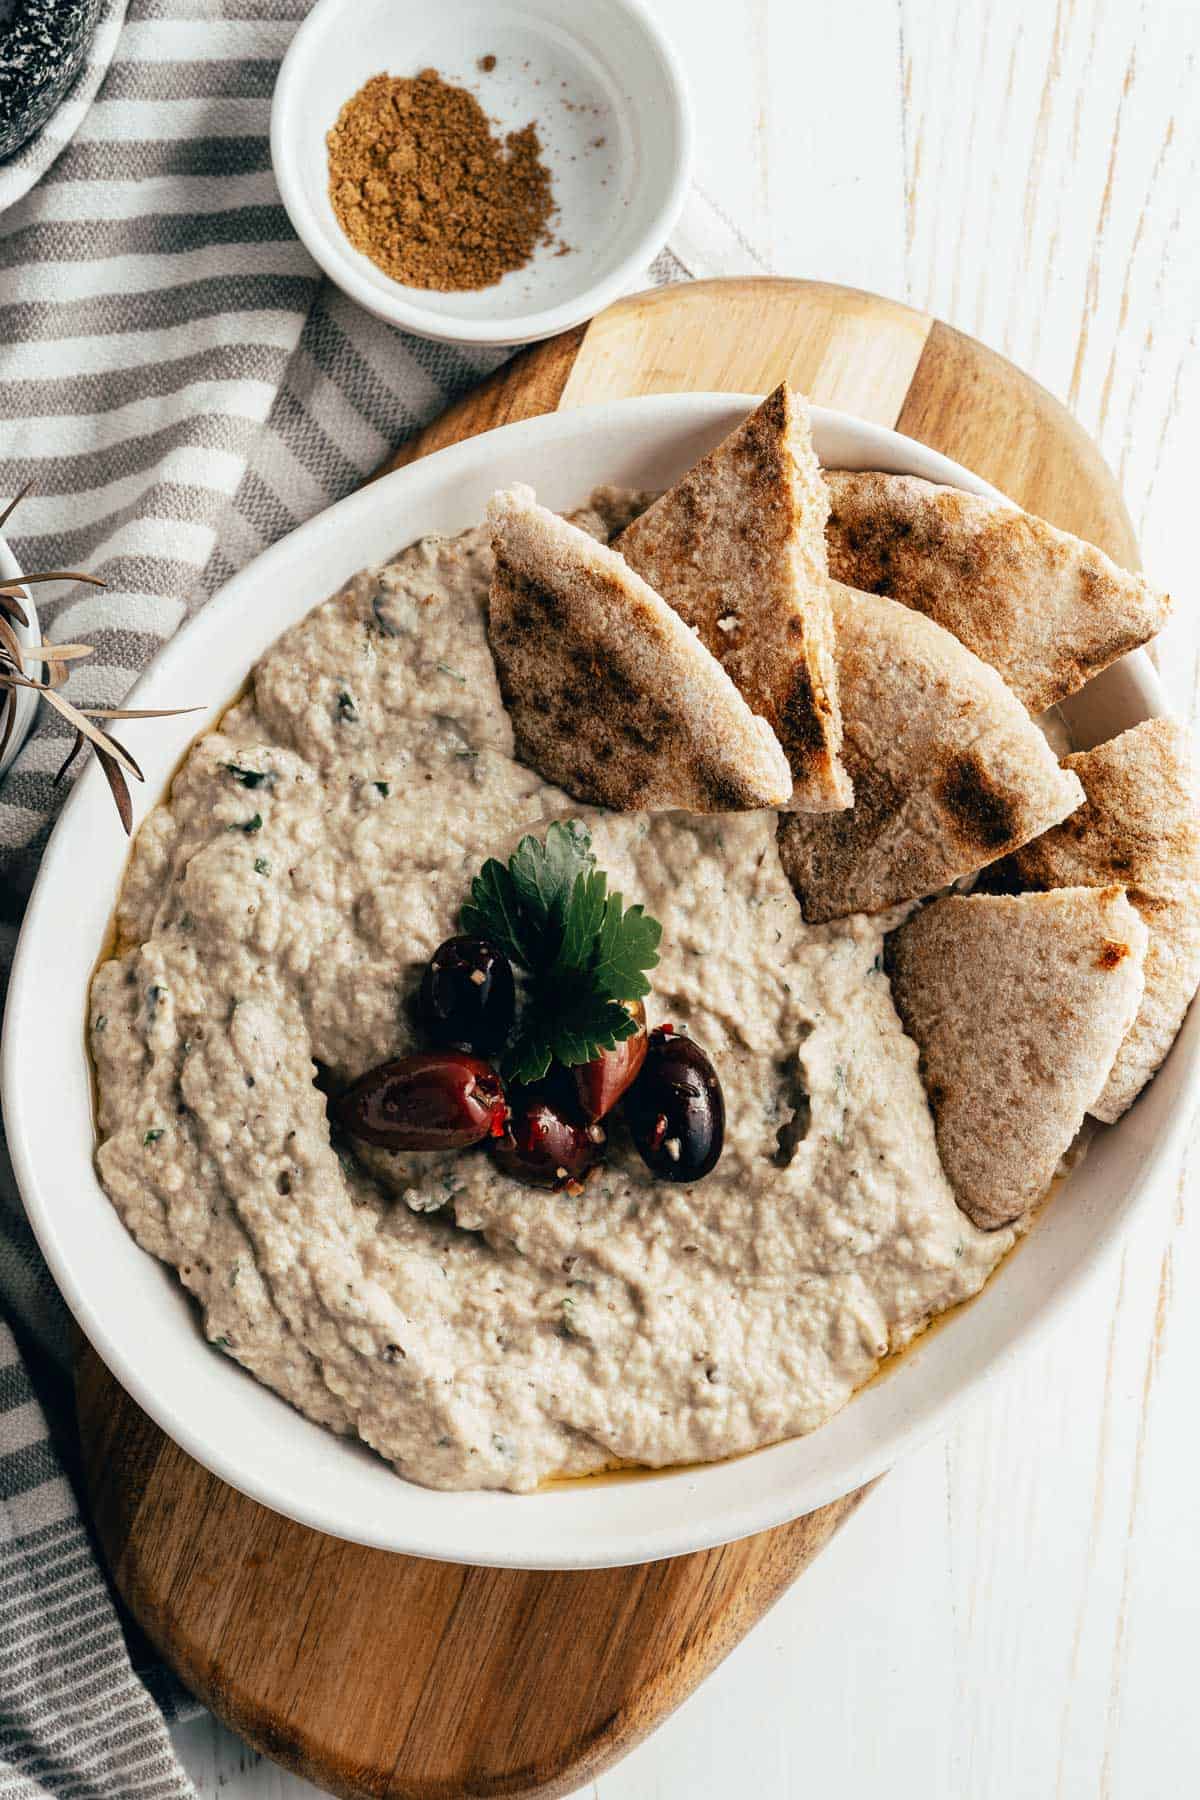 A bowl of baba ganoush eggplant dip garnished with herbs and olives, served with pita bread slices, is placed on a wooden cutting board. 